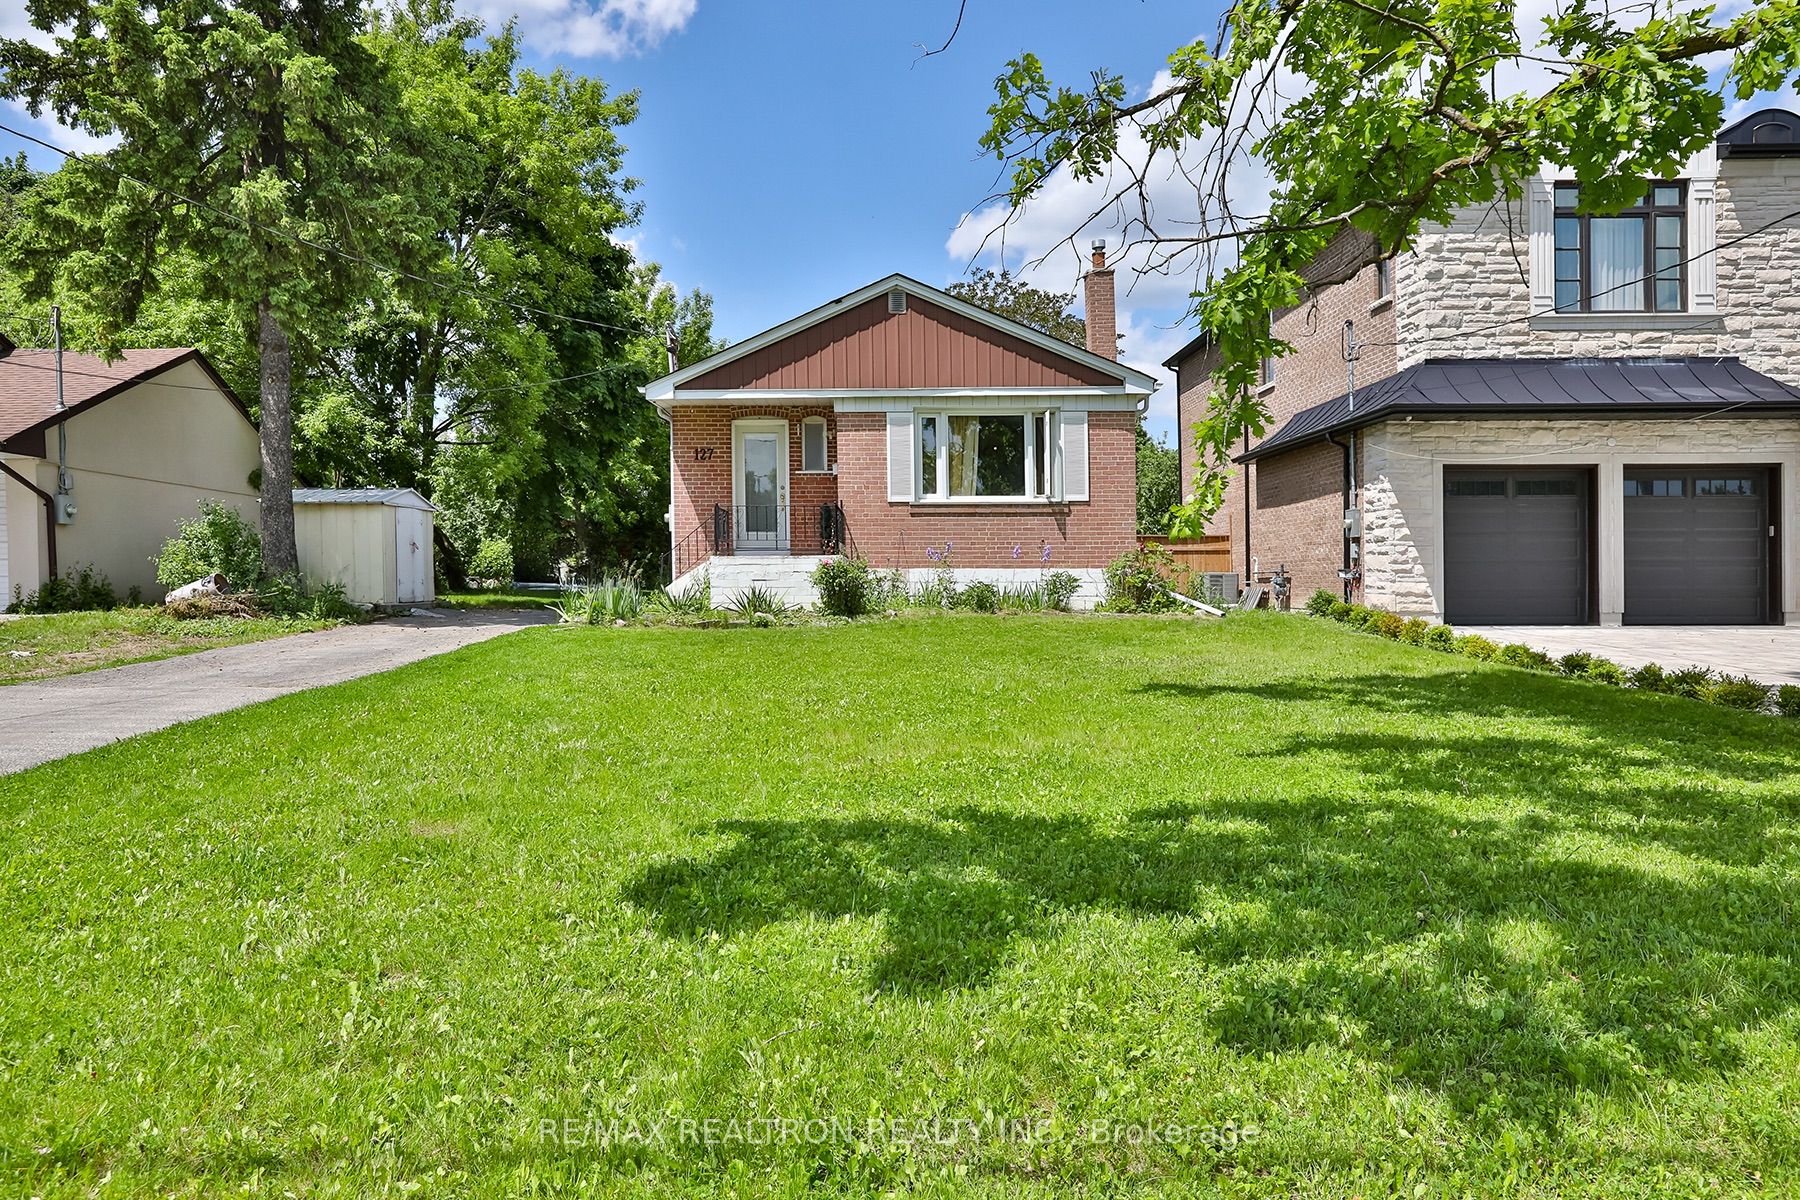 Detached house for sale at 127 Harding Blvd Richmond Hill Ontario